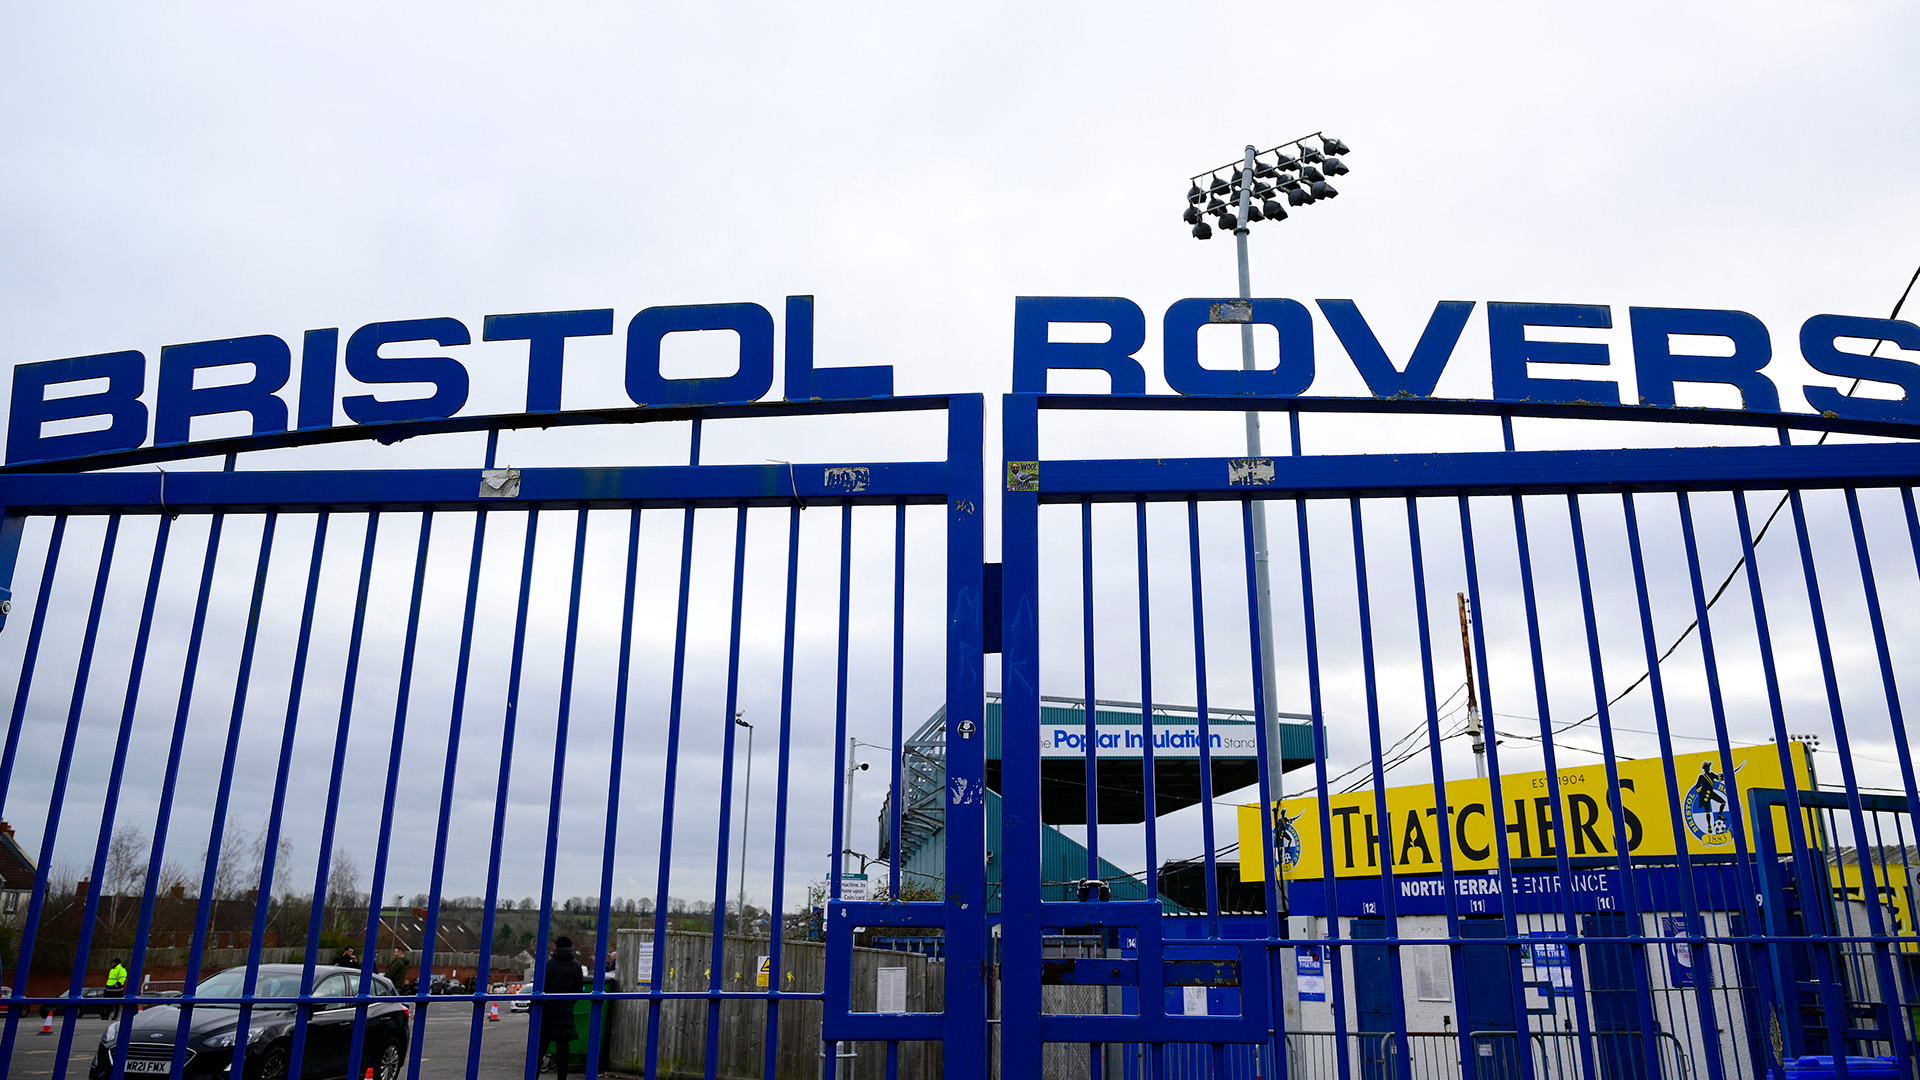 Rovers Gates